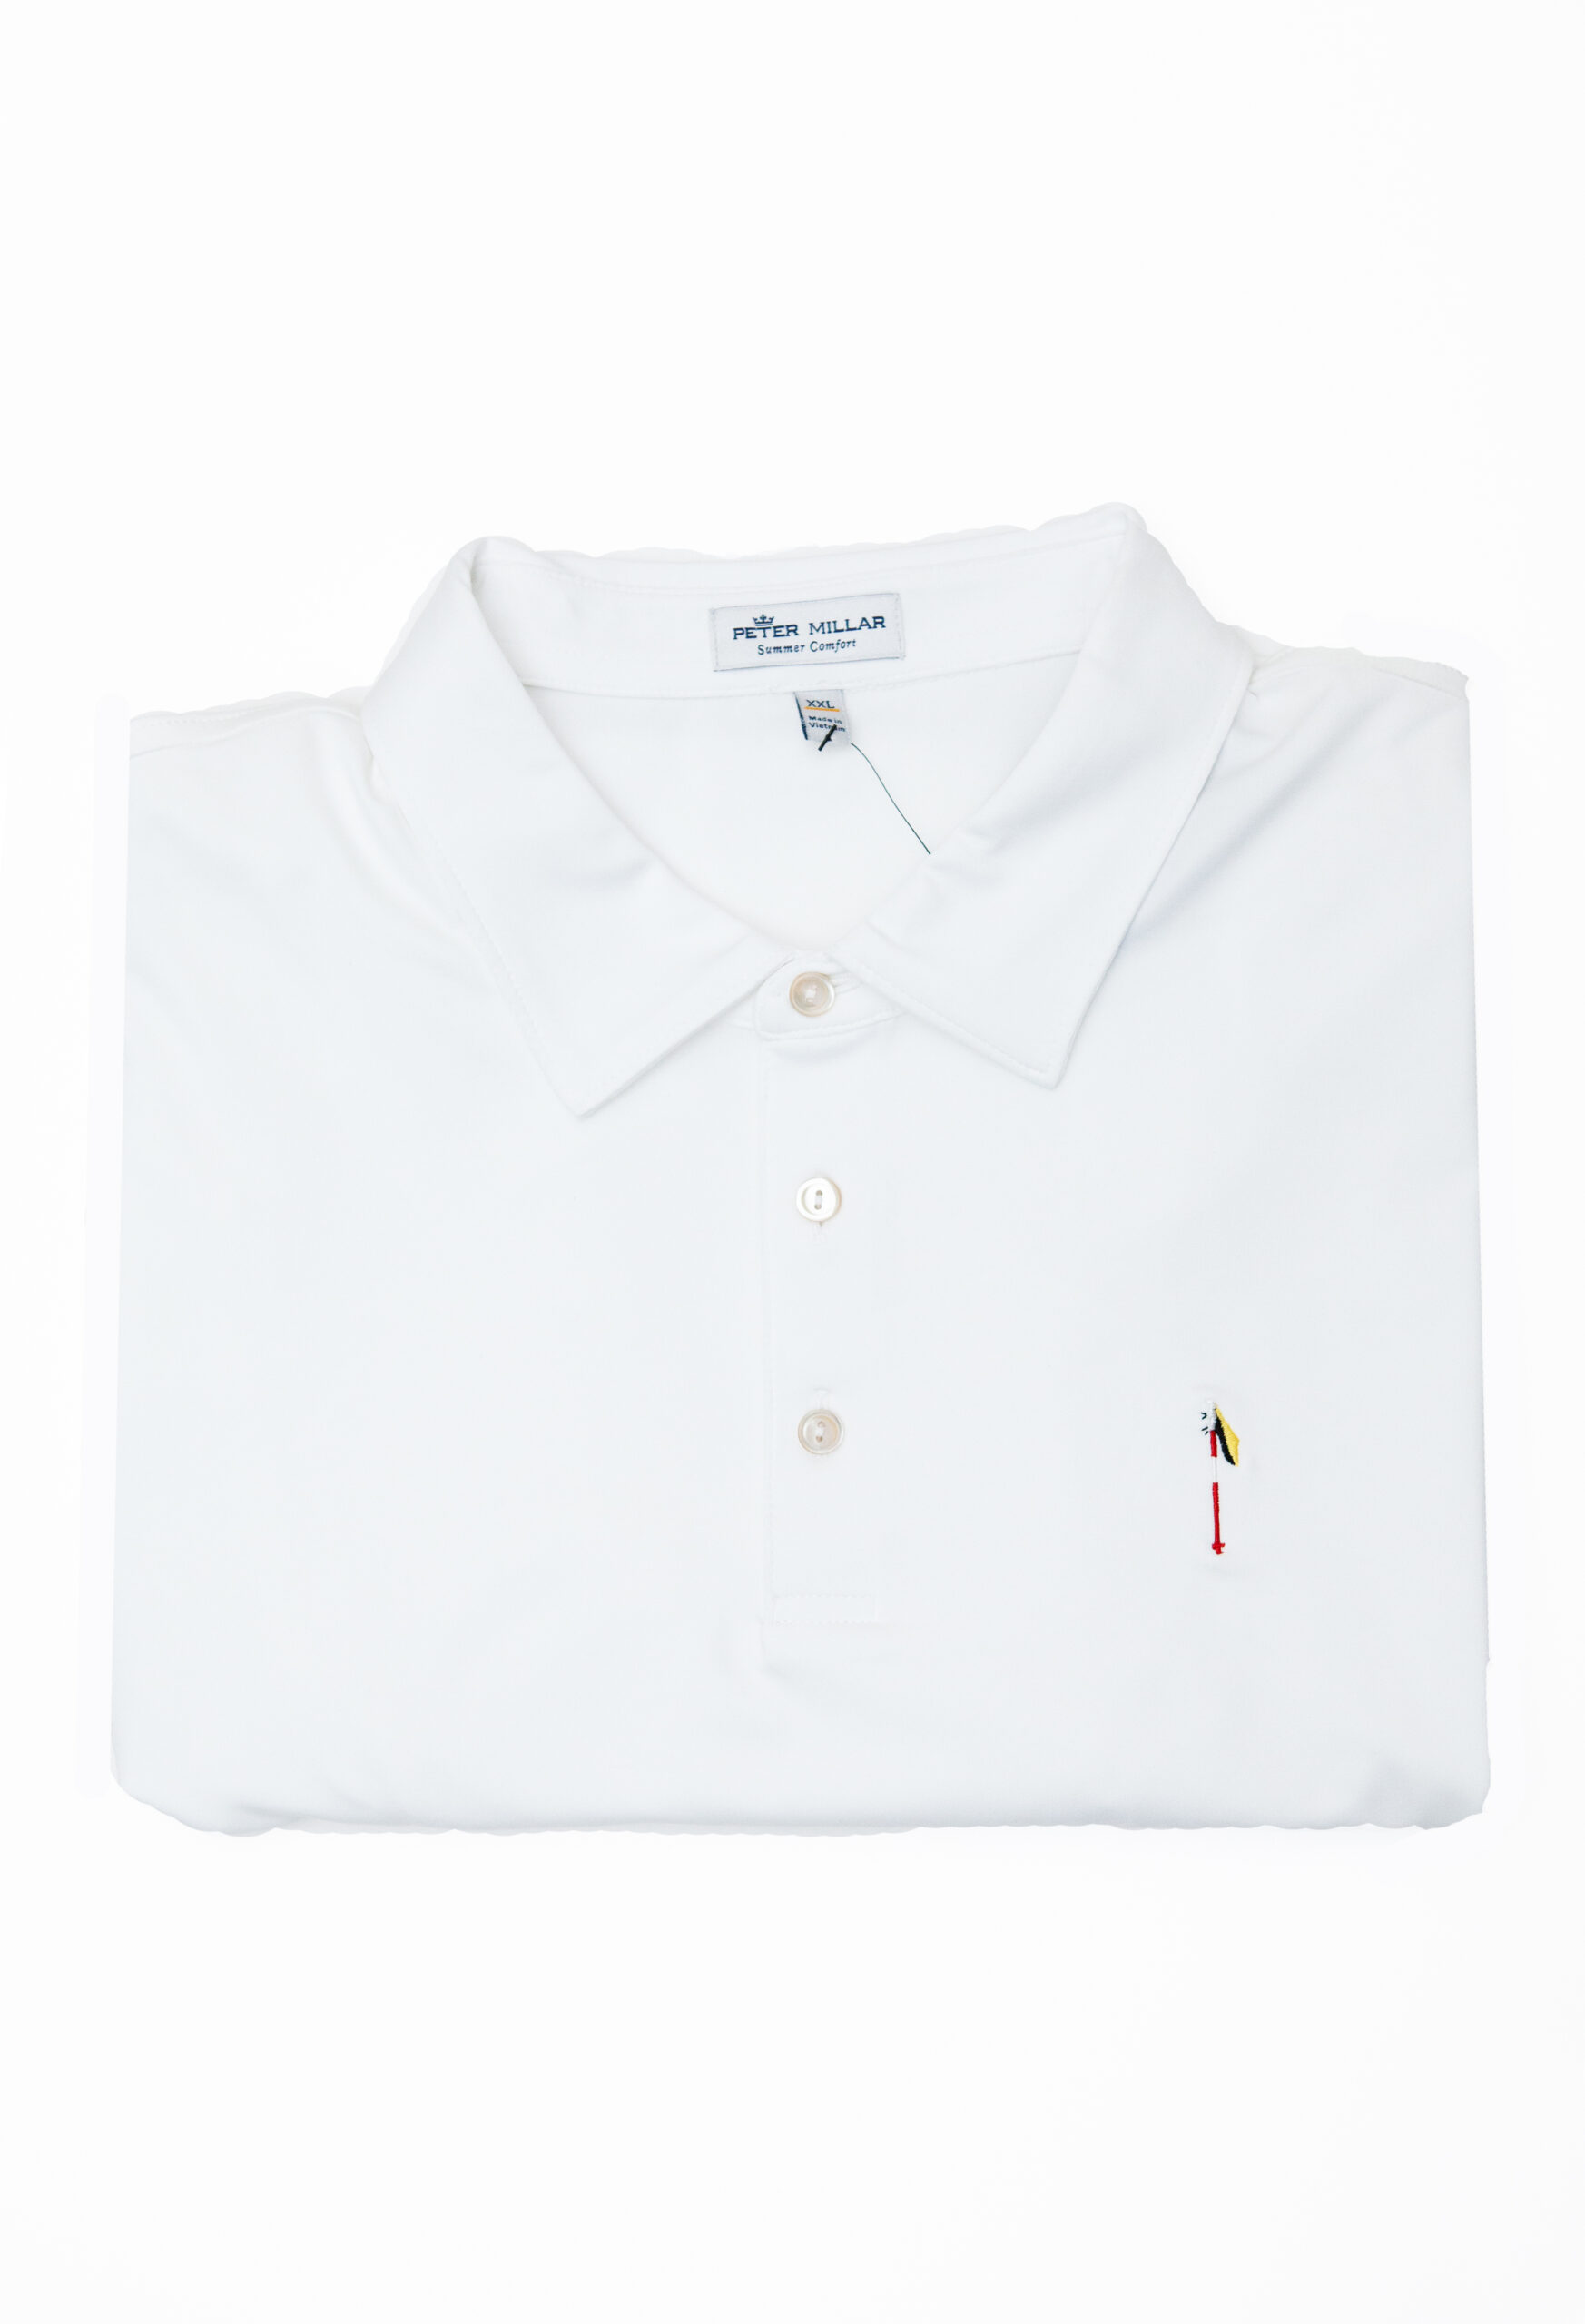 Featured image for “Golf Polo Shirt”